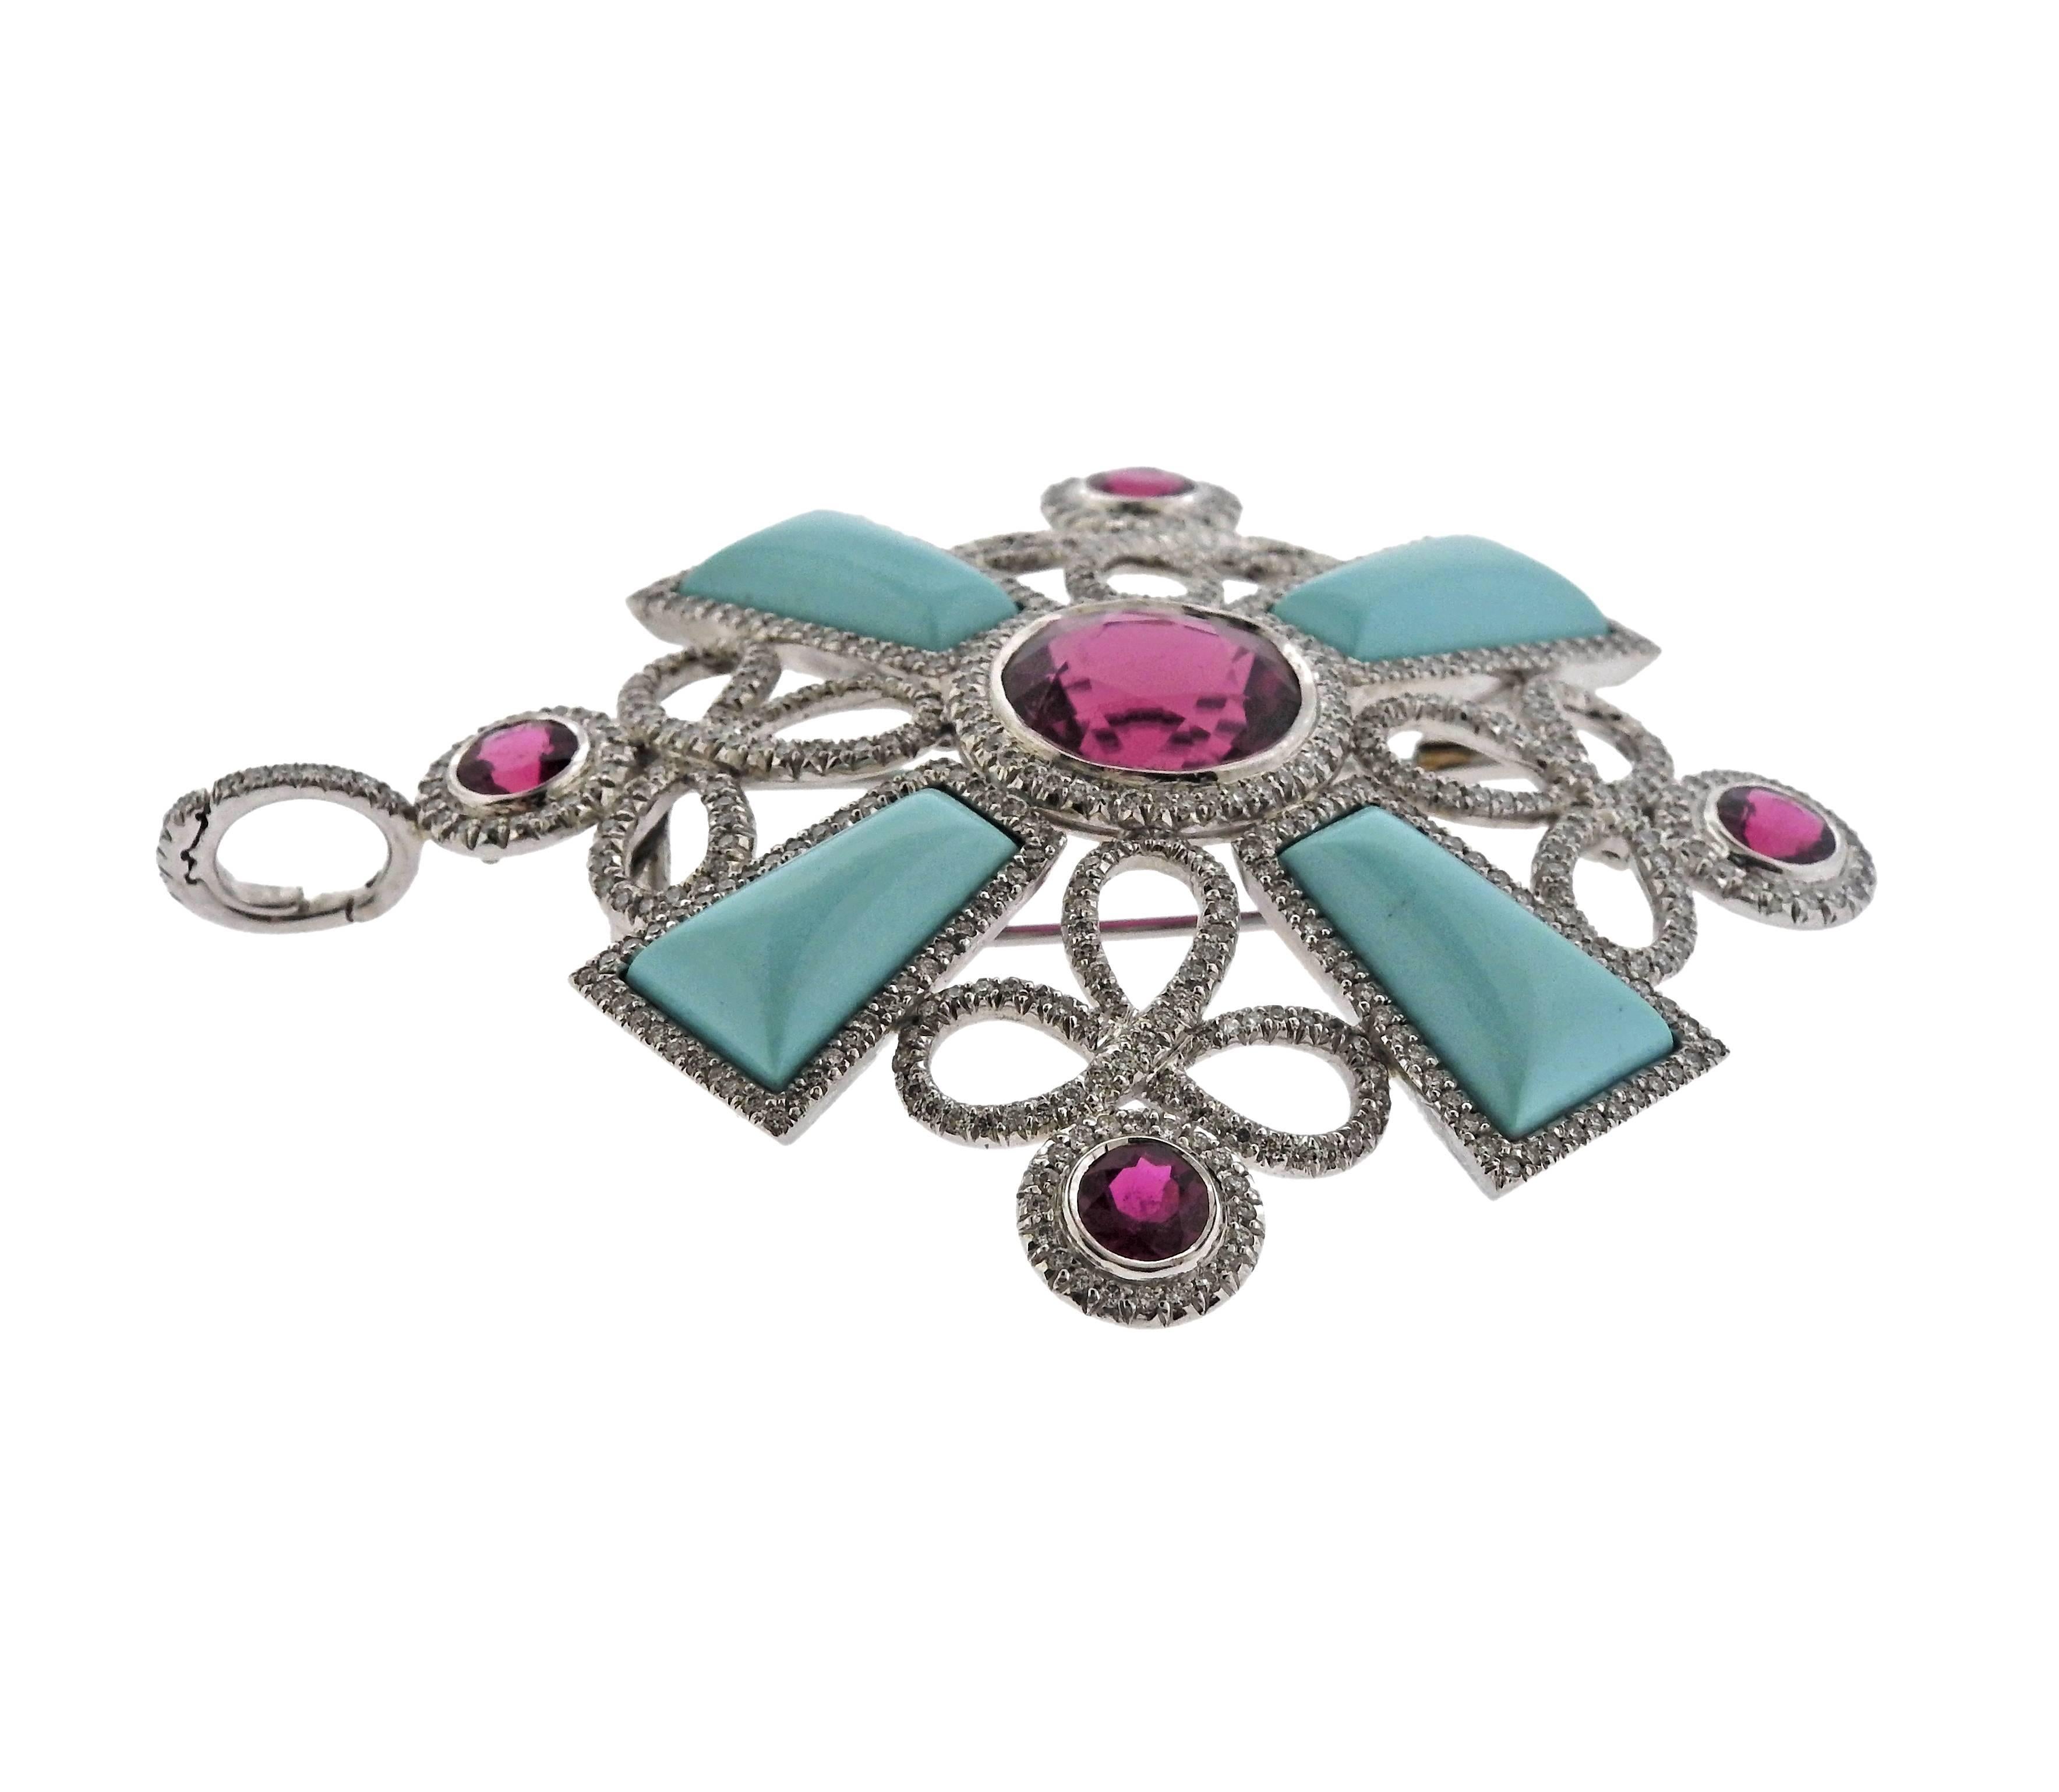 Large 18k white gold cross pendant/brooch, crafted by Haume, decorated with turquoise, pink tourmalines and approximately 1.80ctw in diamonds. Pendant measures 78mm x 65mm. Marked: 750, Haume. Weight of the piece - 47.1 grams. 